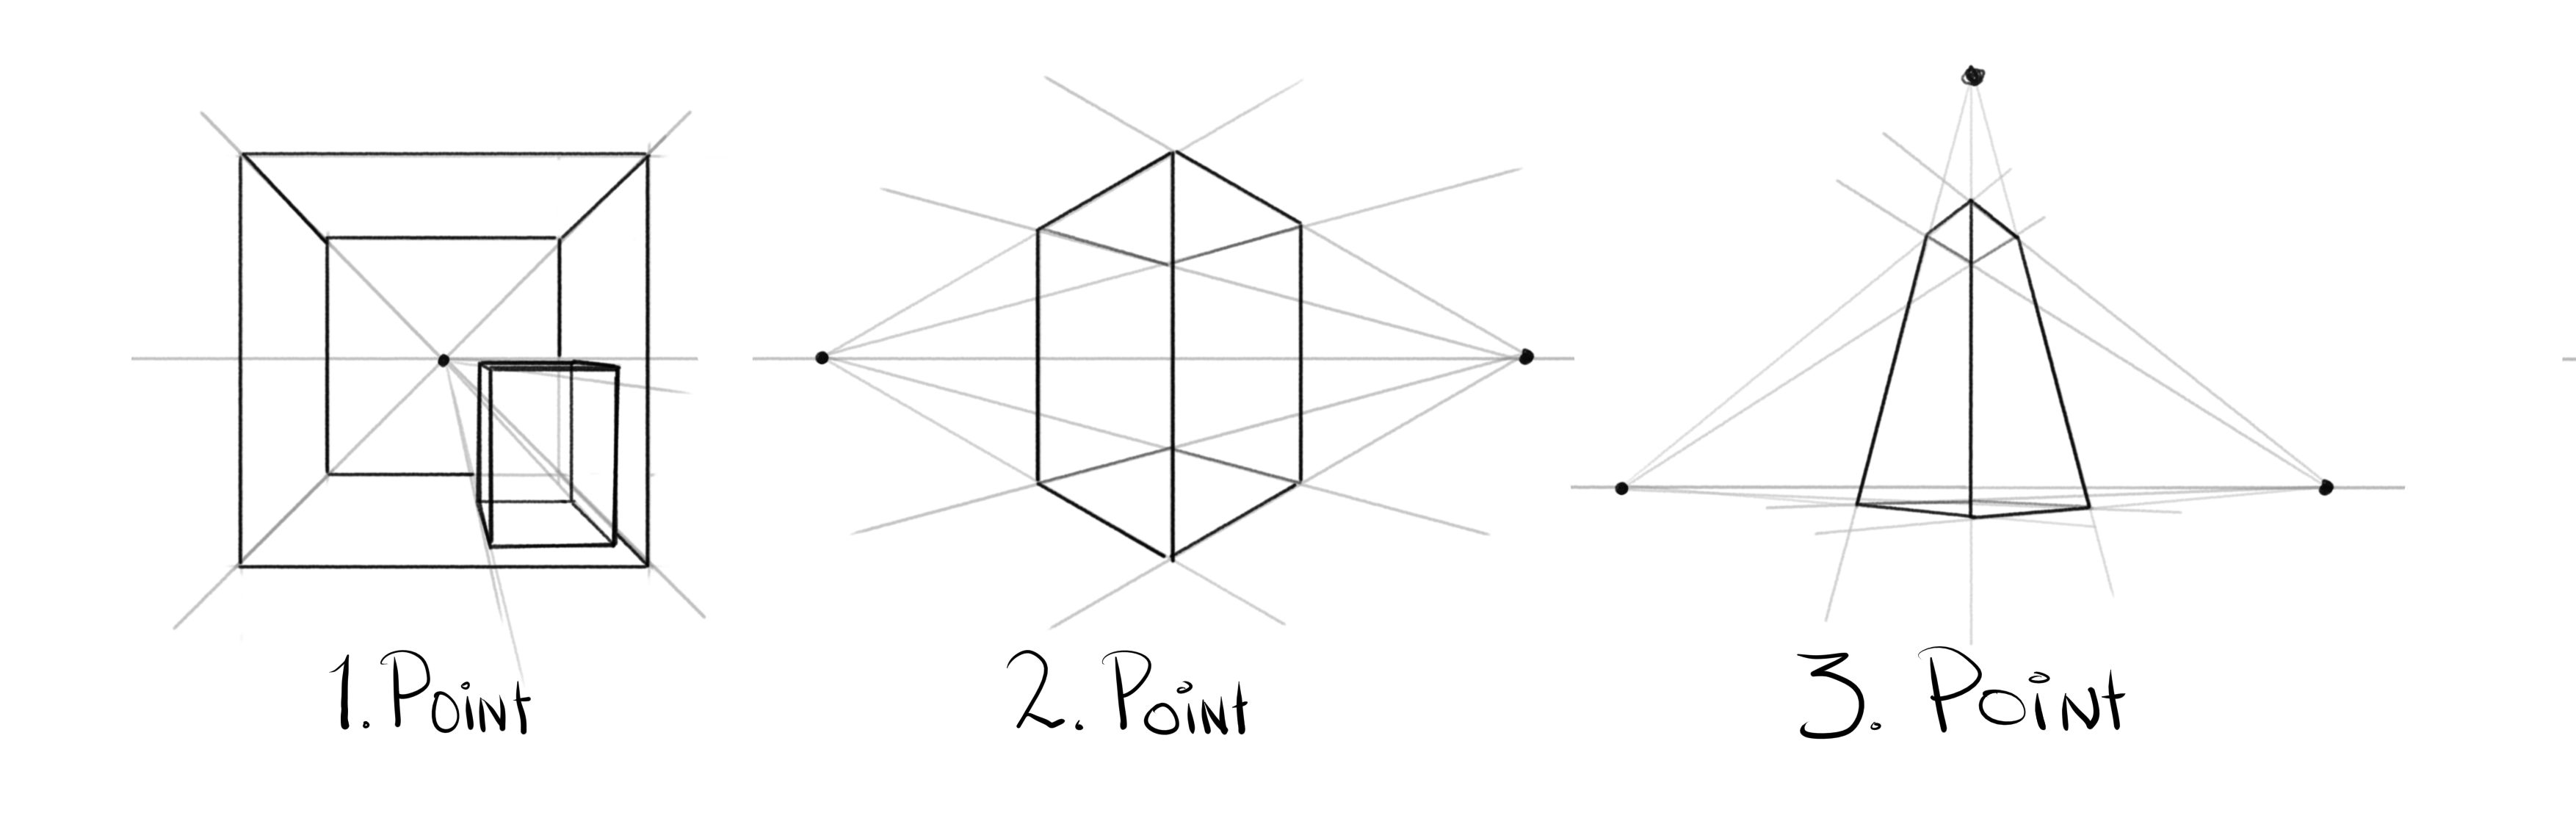 A rough sketch showing the three vanishing points.